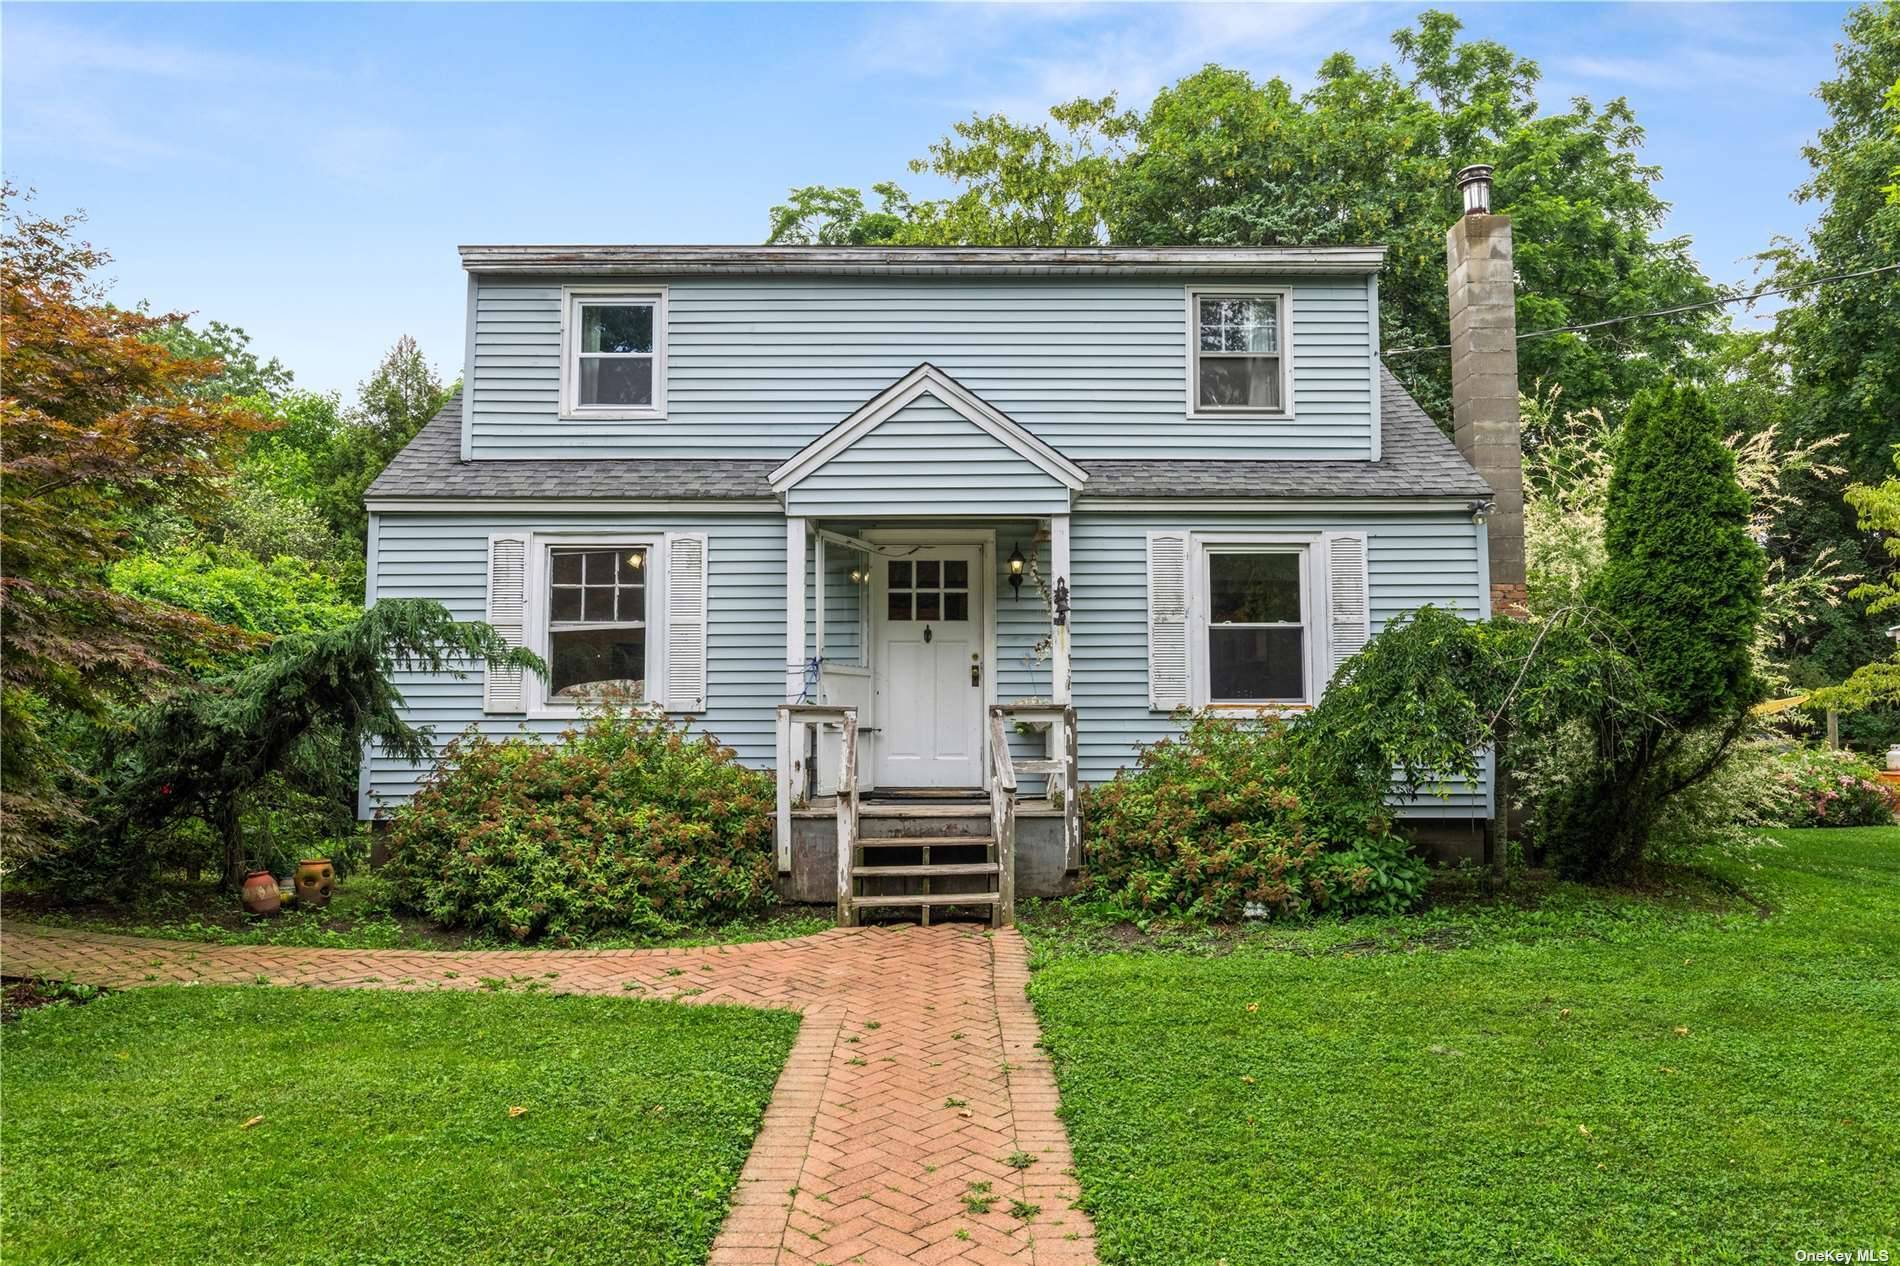 This sweet cape style home offers easy access to Southold's train amp ; bus stops, shopping, Founders beach and park.